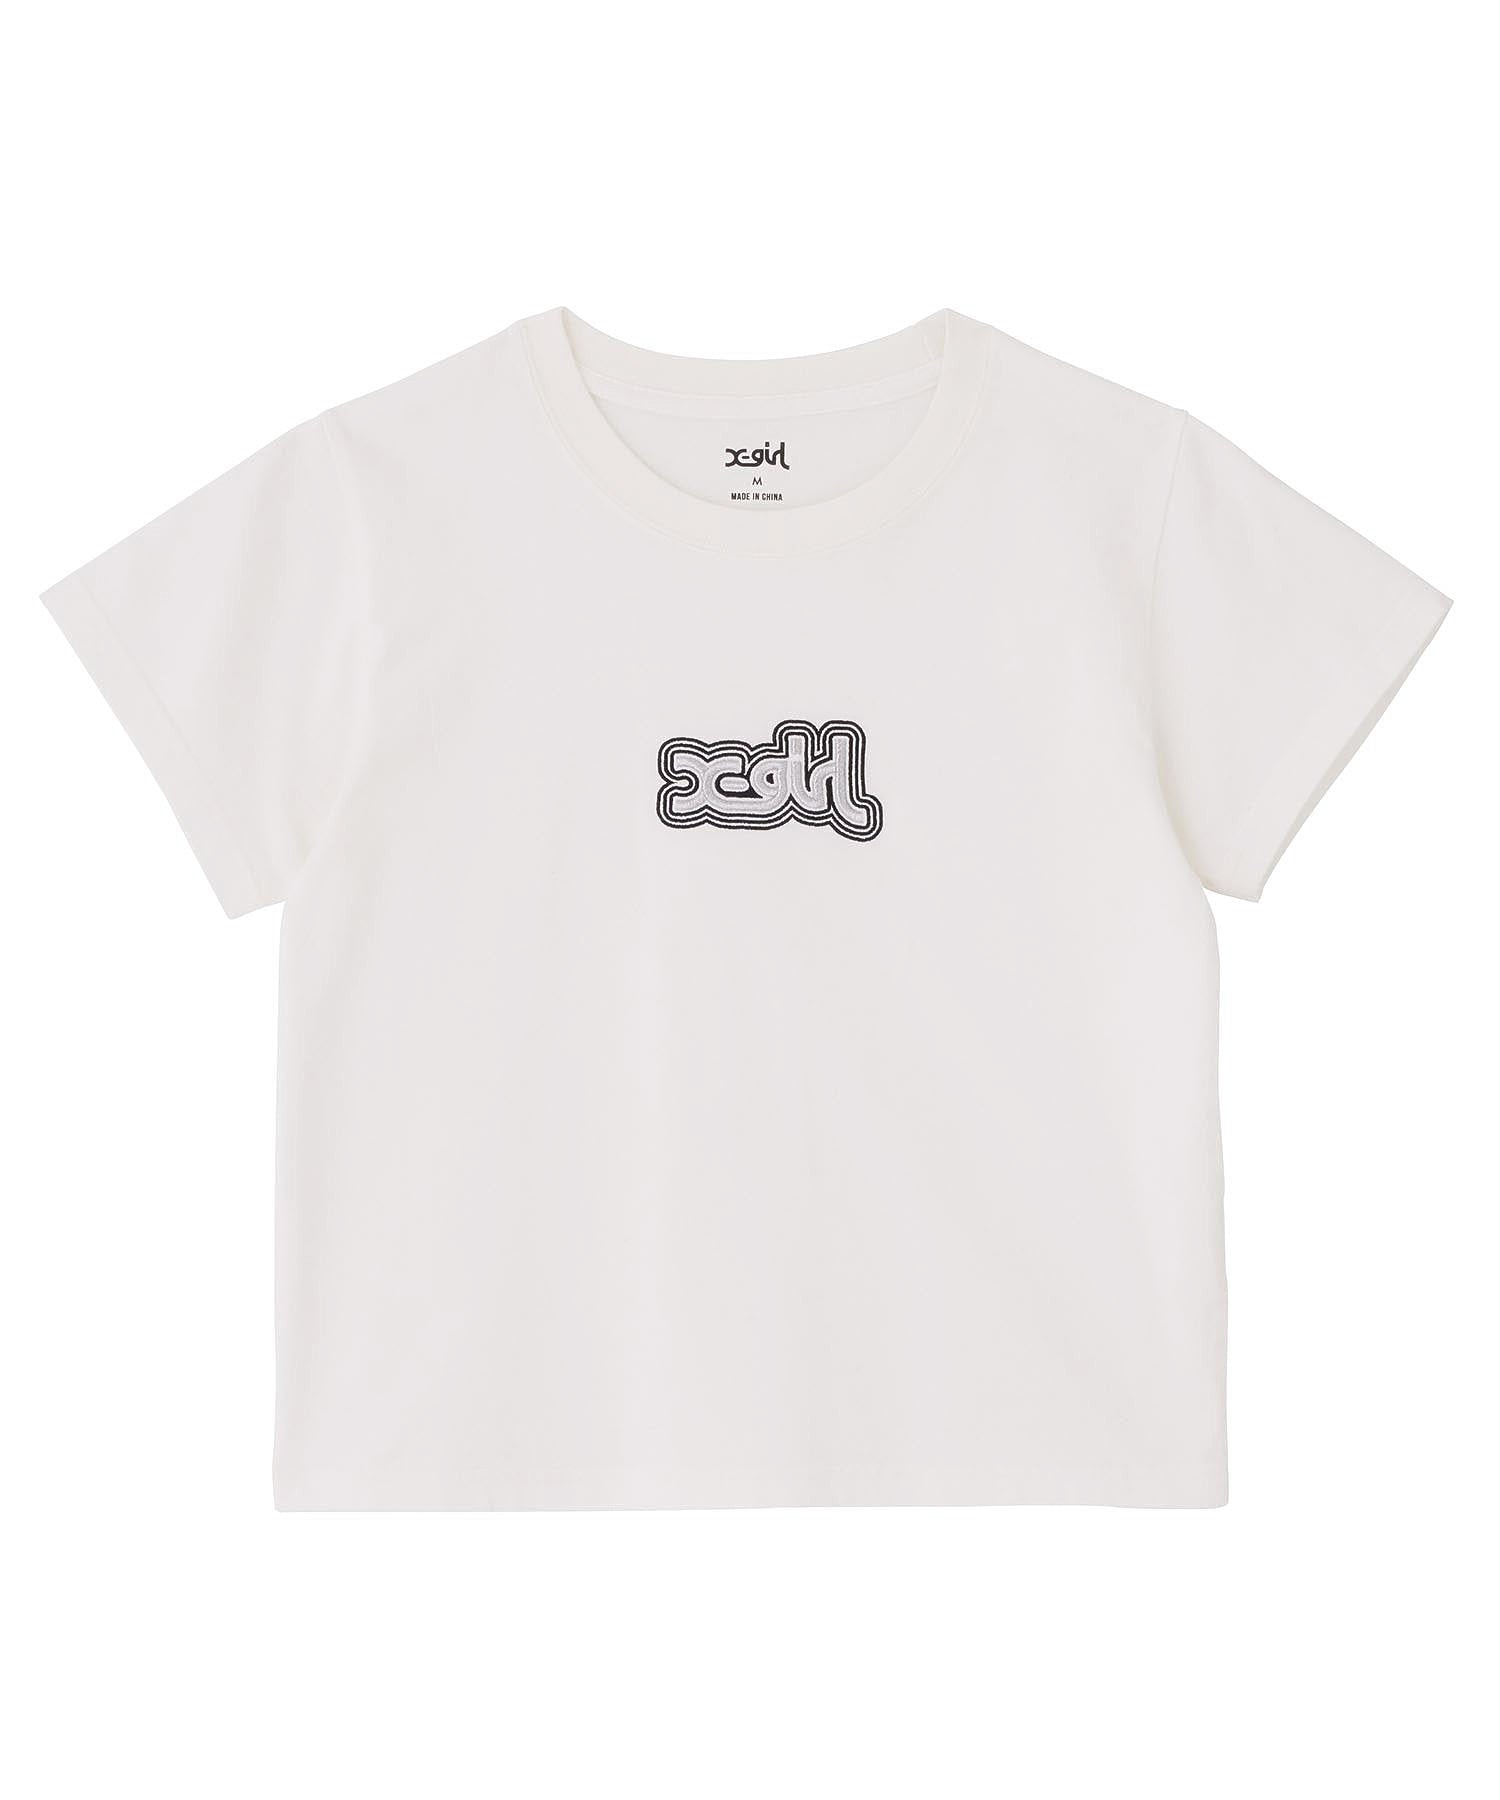 OUTLINE MILLS LOGO EMBROIDERY S/S BABY TEE X-girl